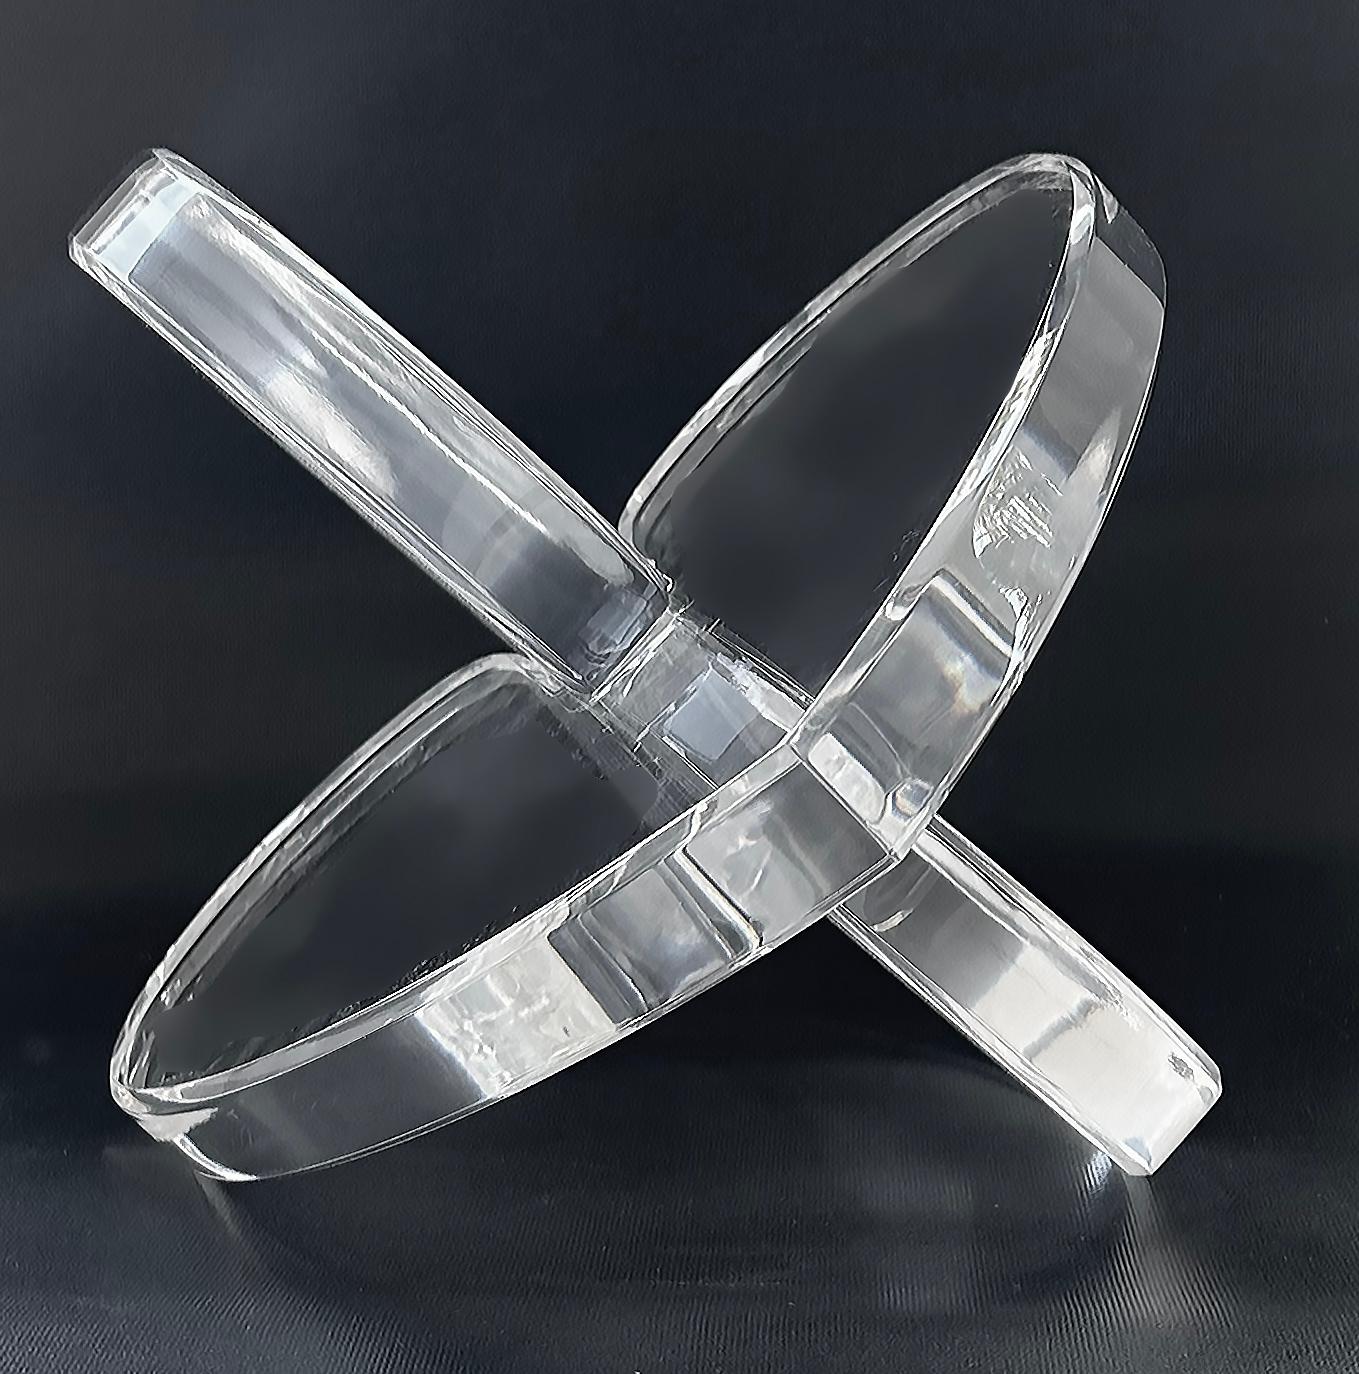 Michael Gitter Clear Lucite Interlocking Hearts Sculpture Signed, 2024

Offered for sale is a clear acrylic interlocking hearts sculpture by artist Michael Gitter signed and dated 2024.
We offer Michael Gitter's interlocking hearts in many materials